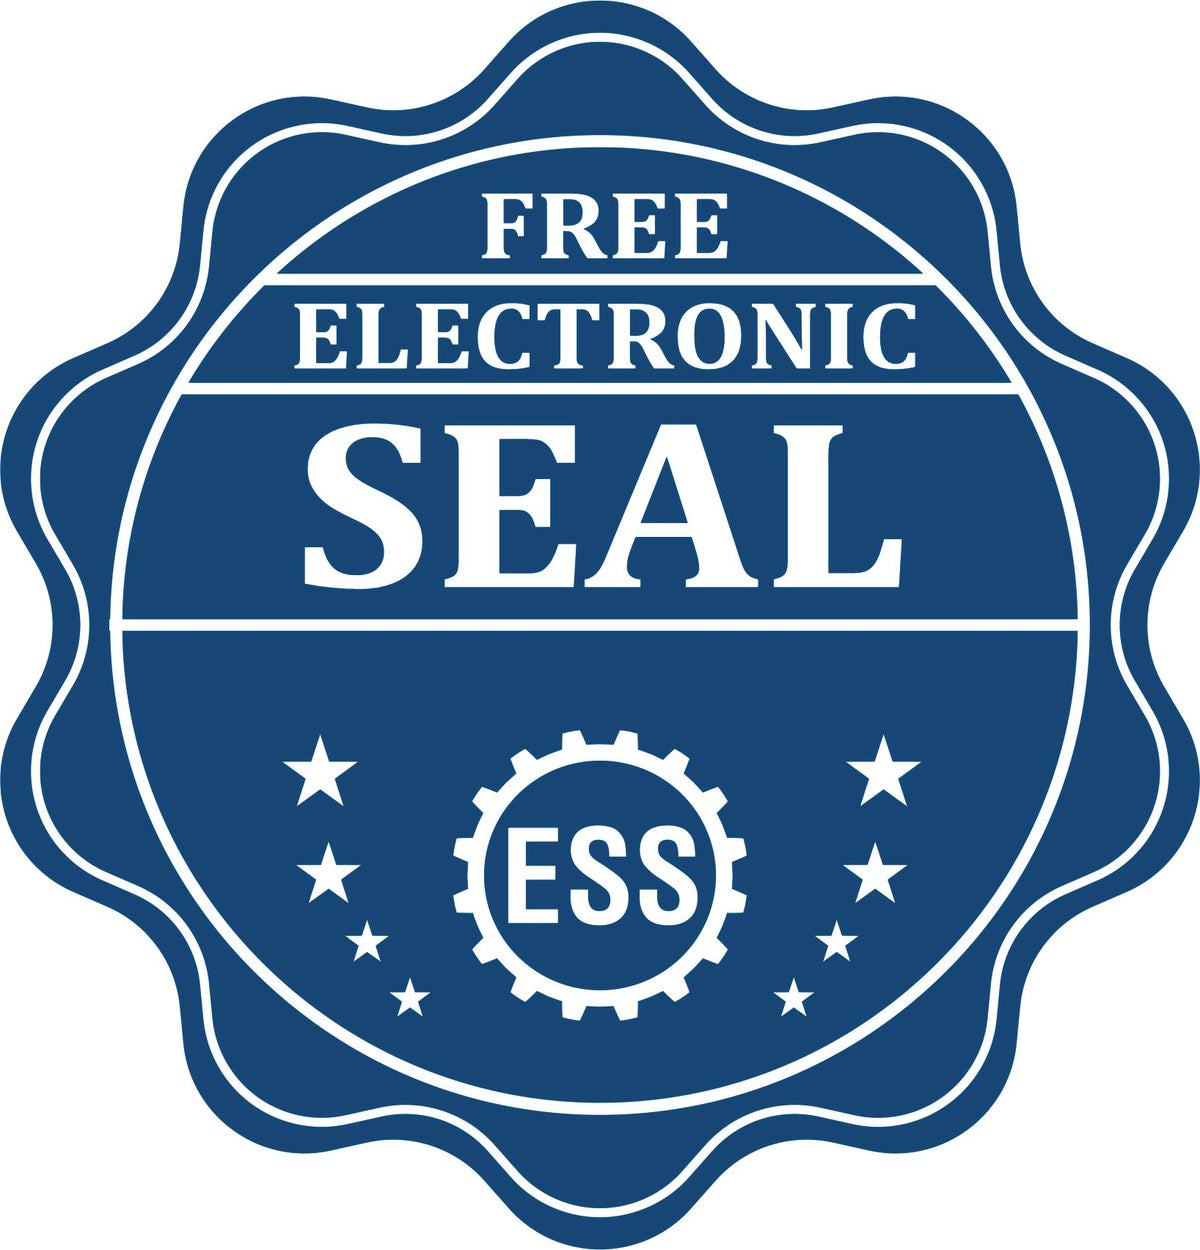 A badge showing a free electronic seal for the Heavy Duty Cast Iron North Dakota Architect Embosser with stars and the ESS gear on the emblem.